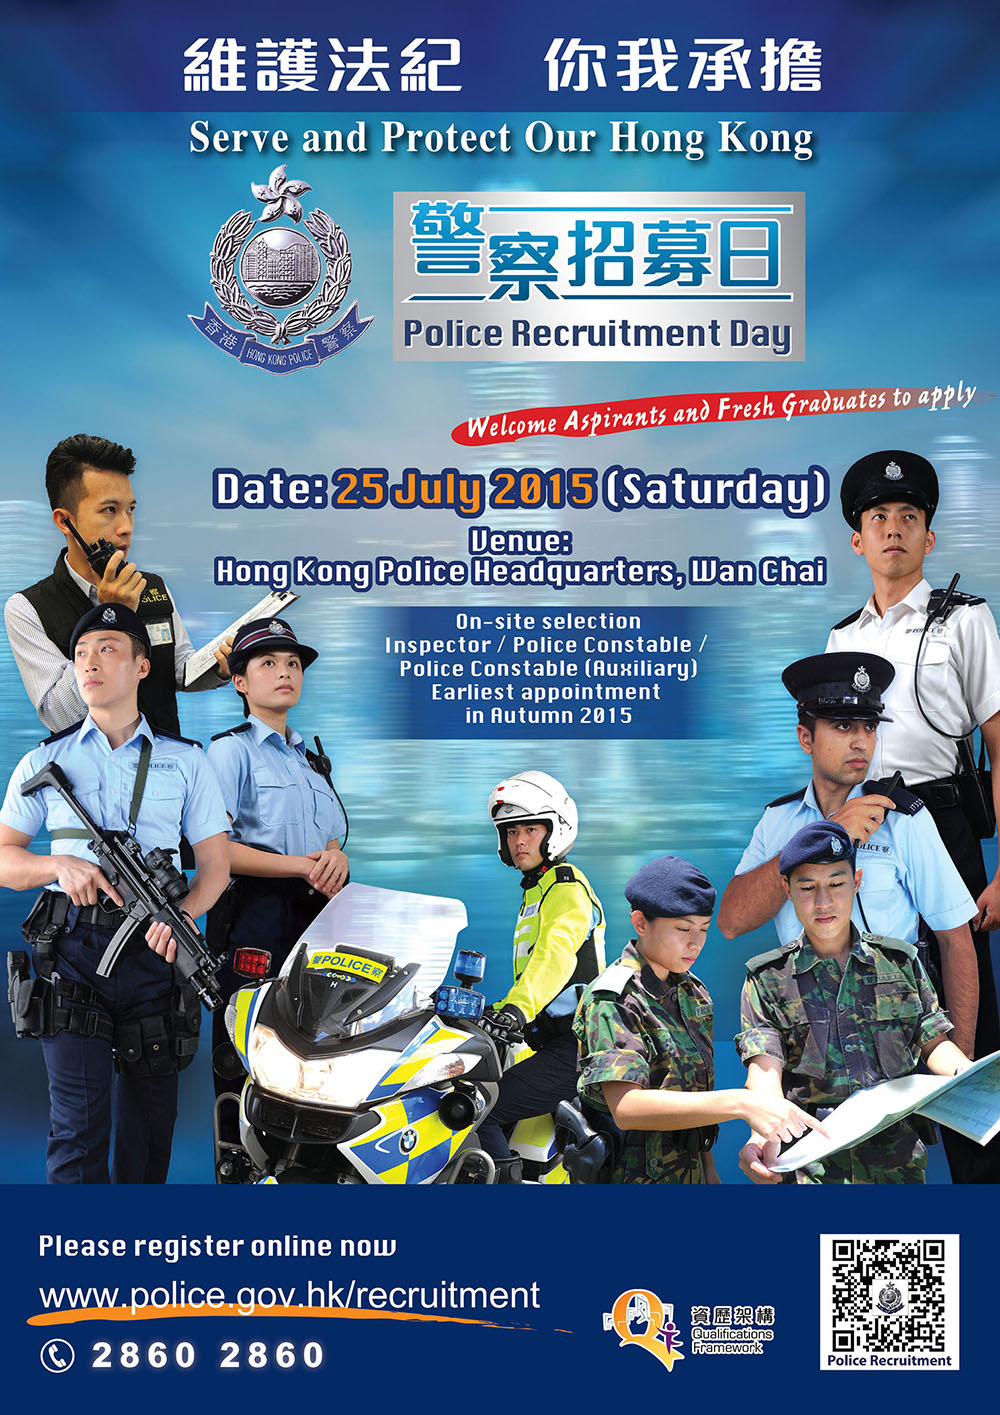 Education & Careers Expo 2015 Date:5 February 2015 (Thursday)�V8 February 2015 (Sunday) On-Site Application Inspector/Police Constable/ Police Constable (Auxiliary) Earliest Appointment in May 2015 Time:10:00 a.m.�V7:00 p.m. Venue:Exhibition Hall 1, Hong Kong Convention and Exhibition Centre, Wanchai, Hong Kong Police Recruitment Website www.police.gov.hk/recruitment Recruitment Hotline 2860 2860